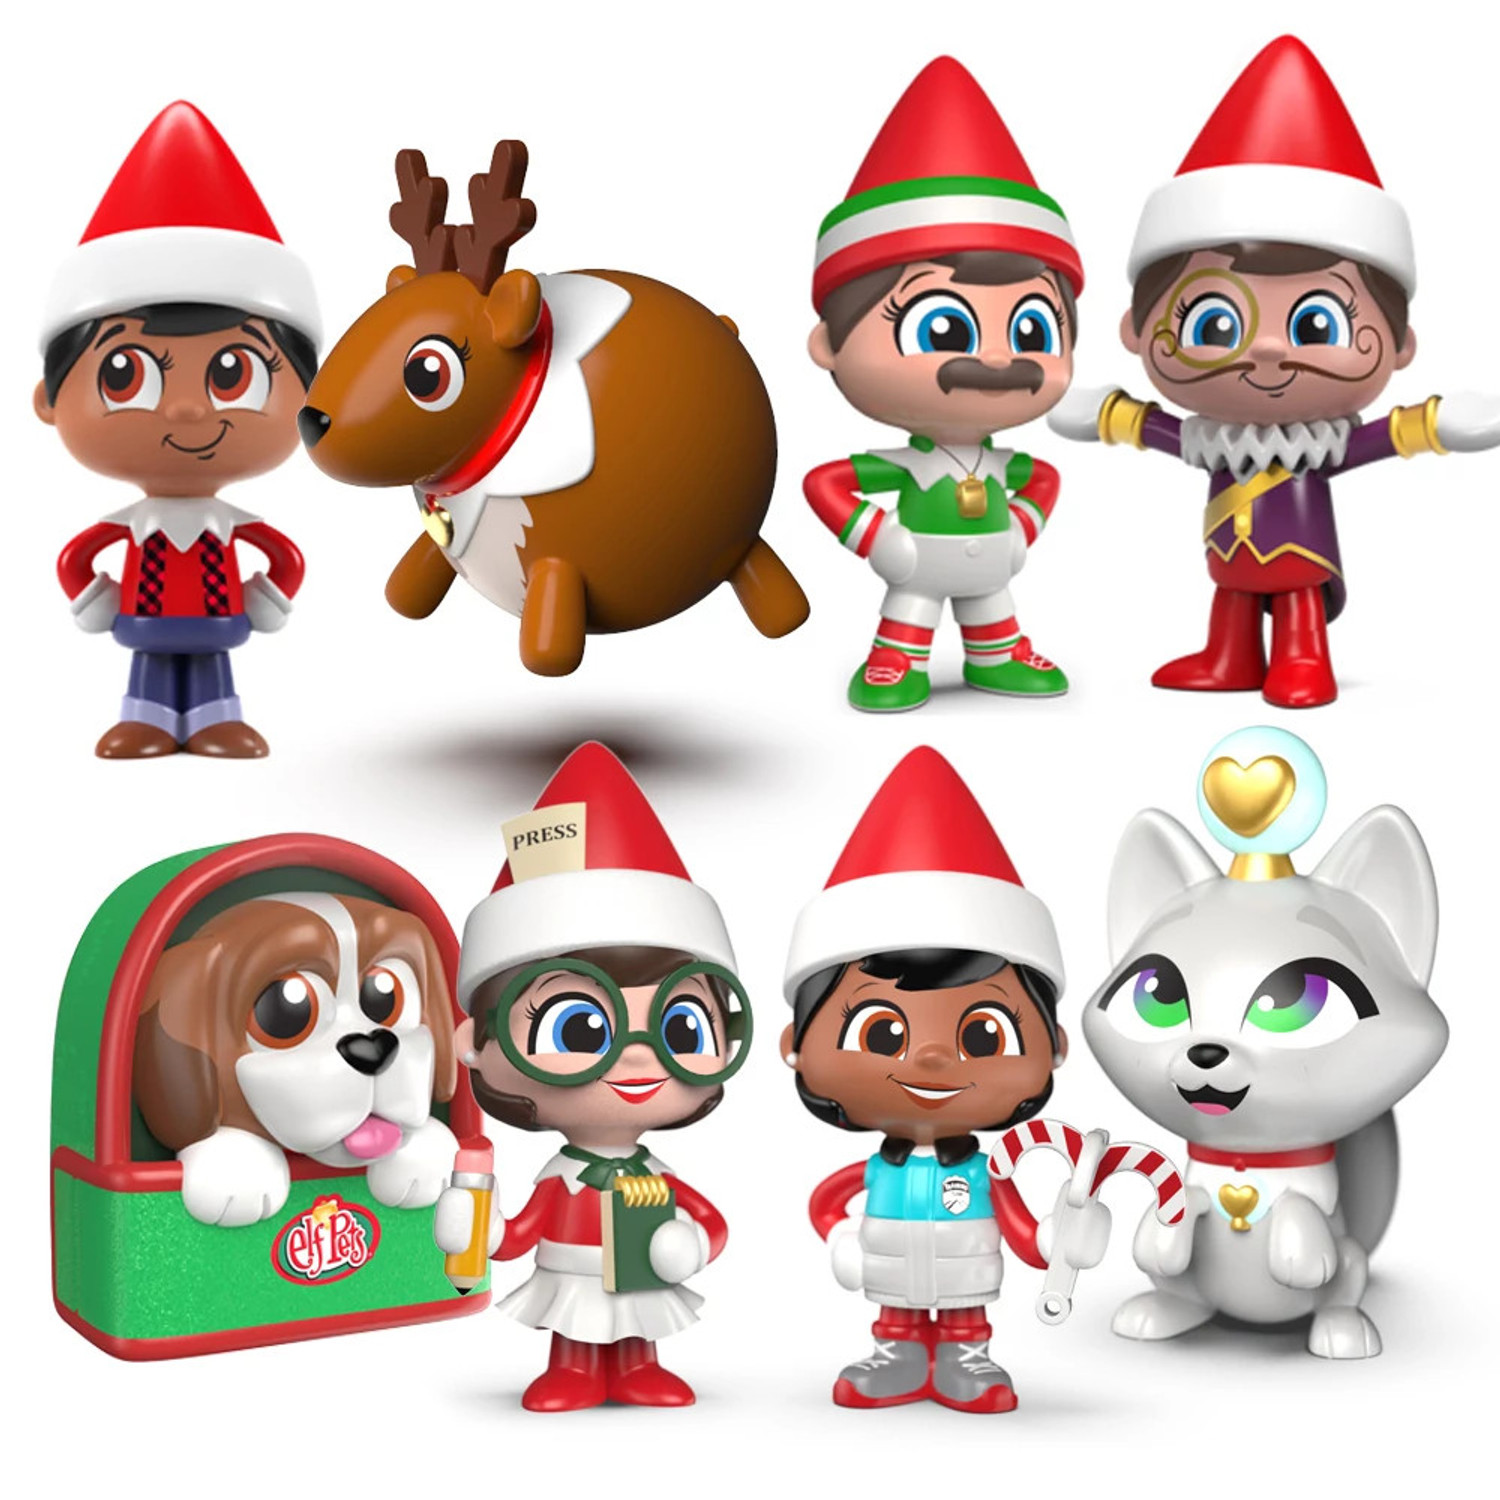 The Elf on the Shelf and Elf Pets - The Elf on the Shelf